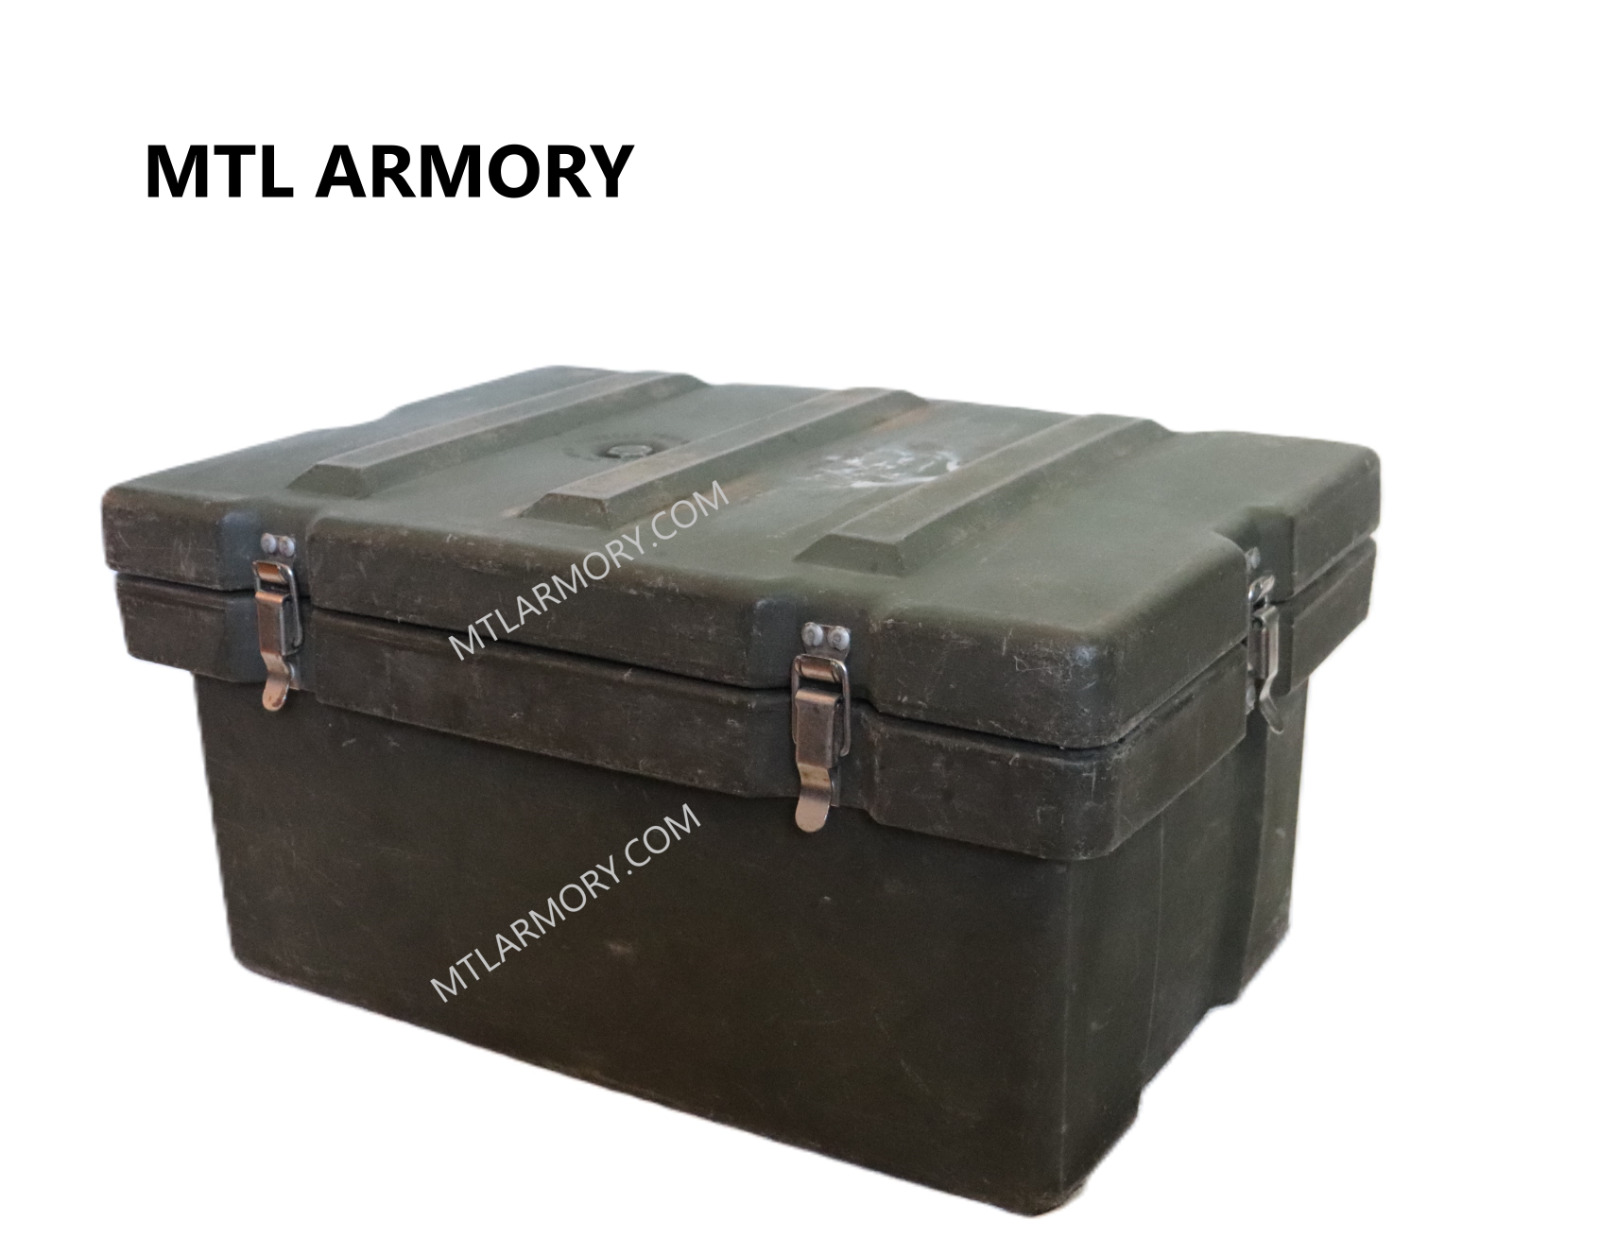 CANADIAN FORCE ARMY COOLER